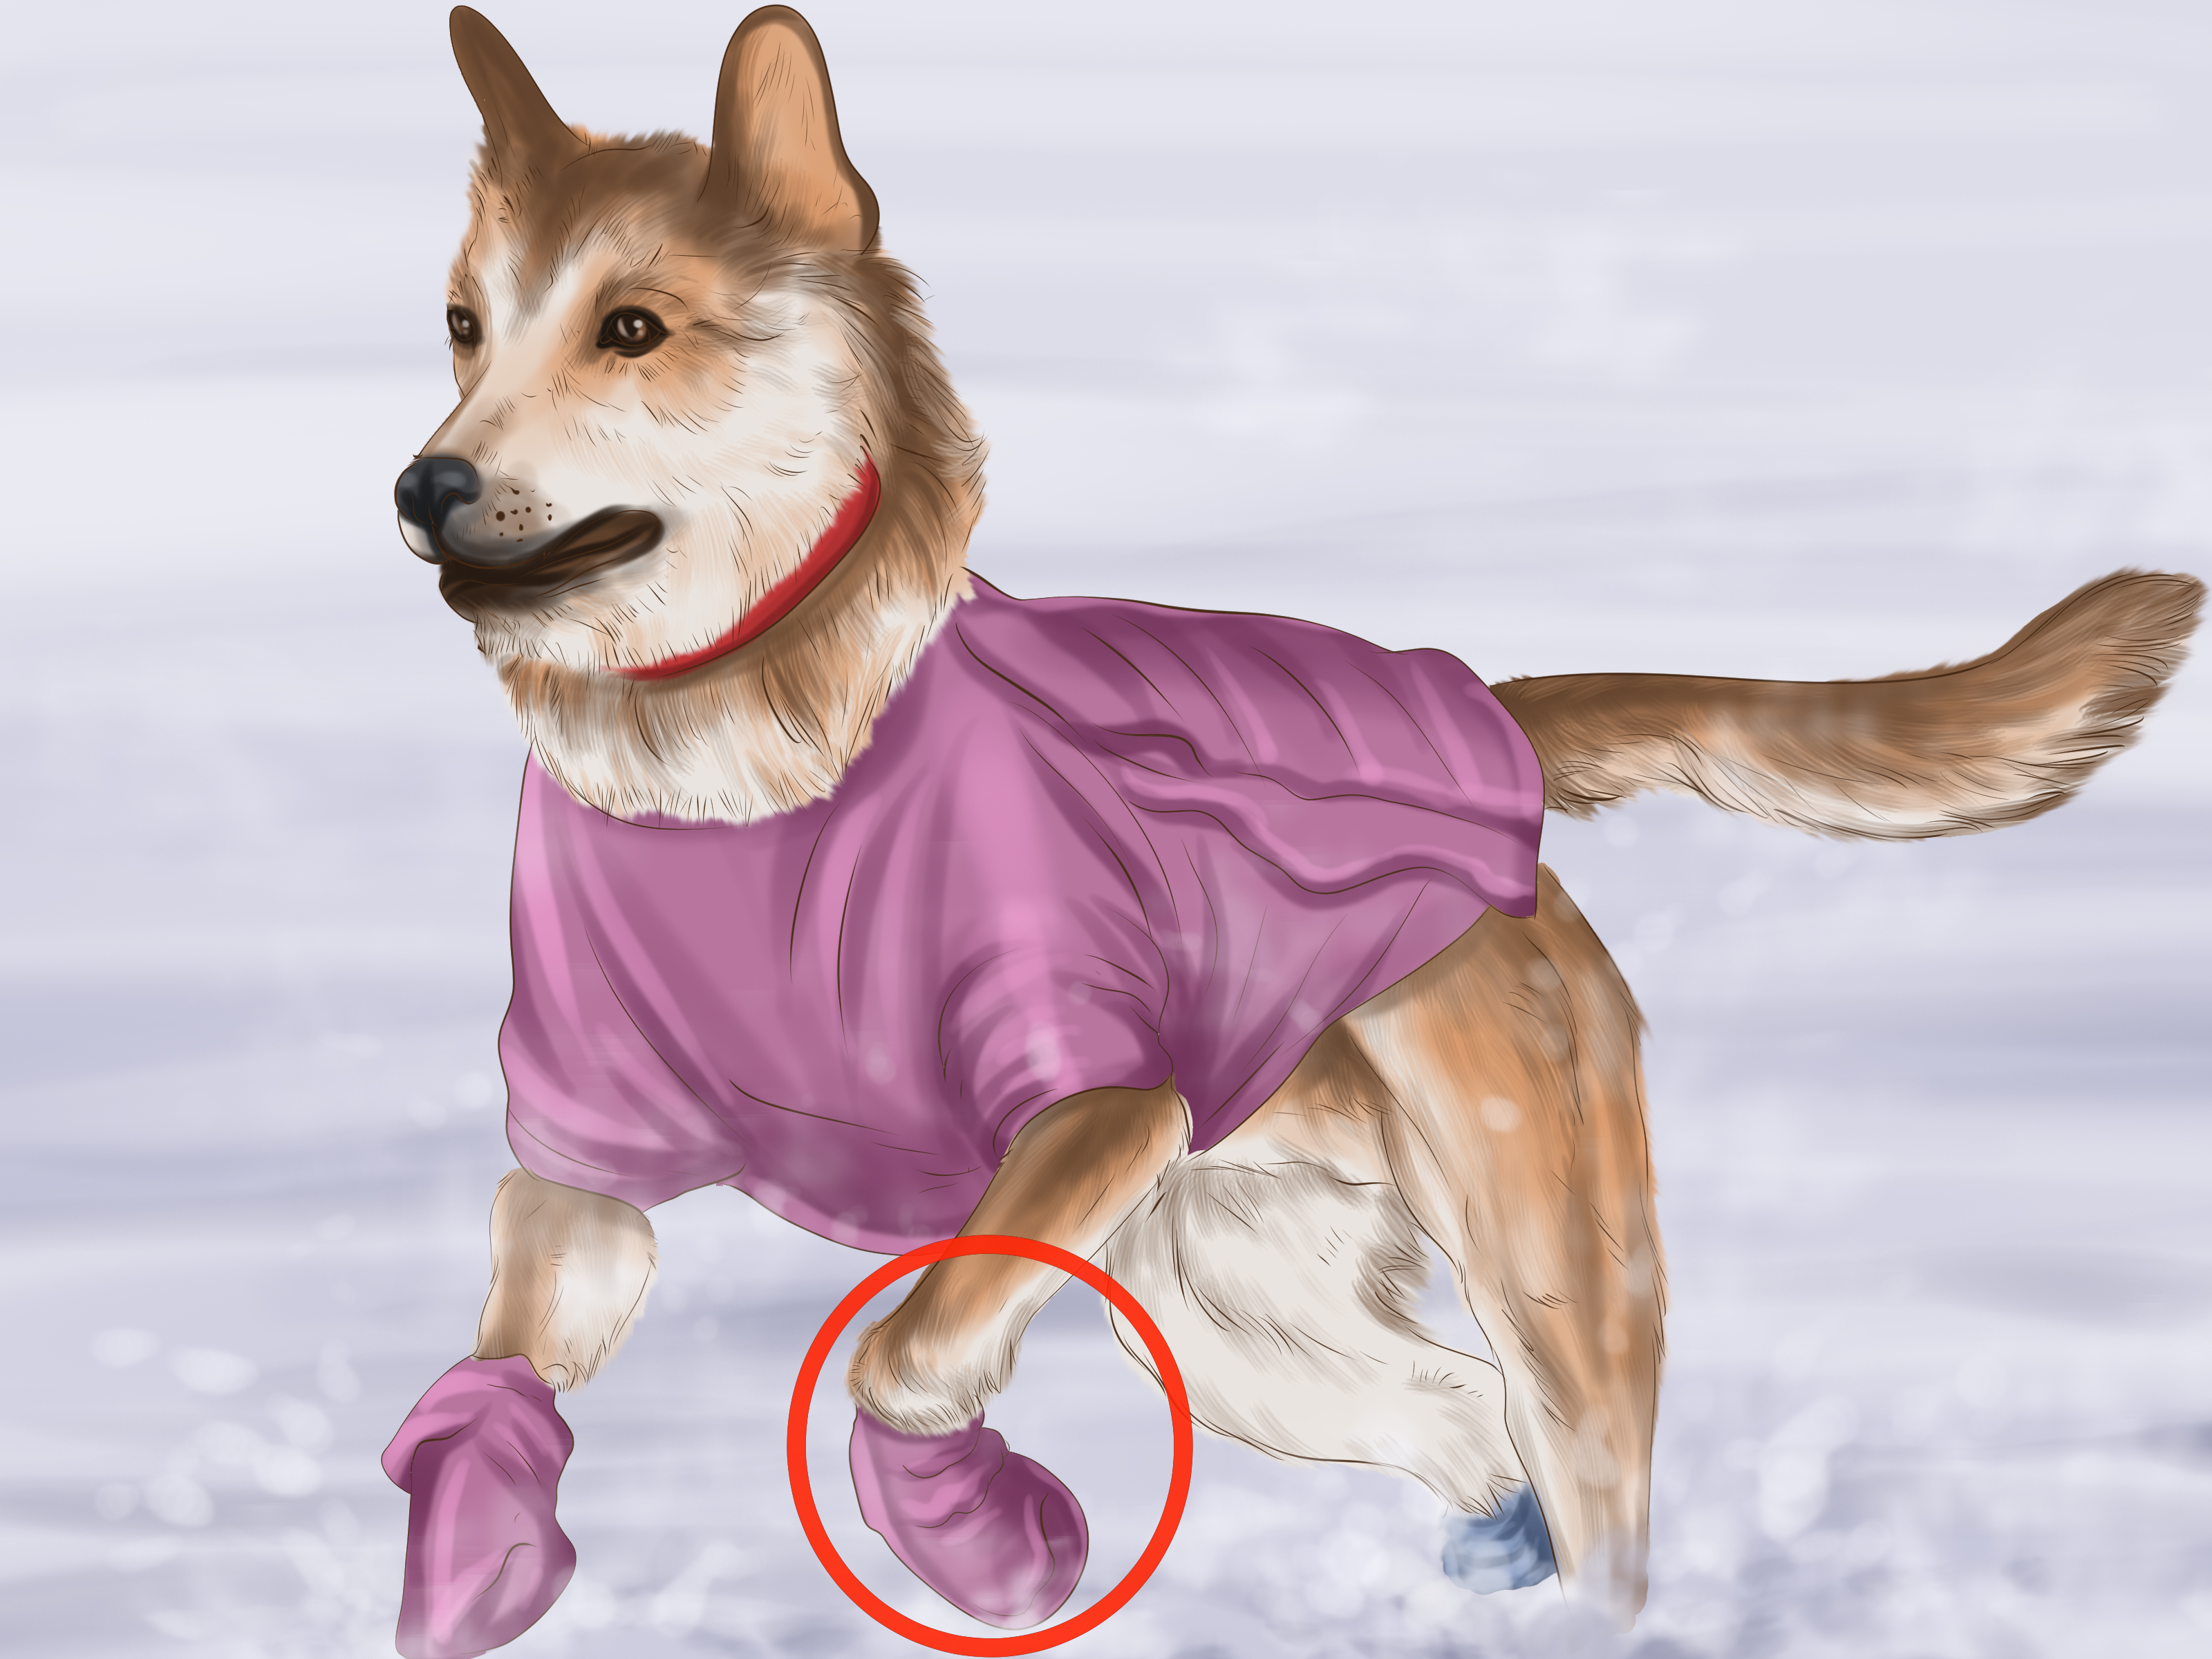 4 Easy Ways to Keep Dogs Warm in the Winter (with Pictures)